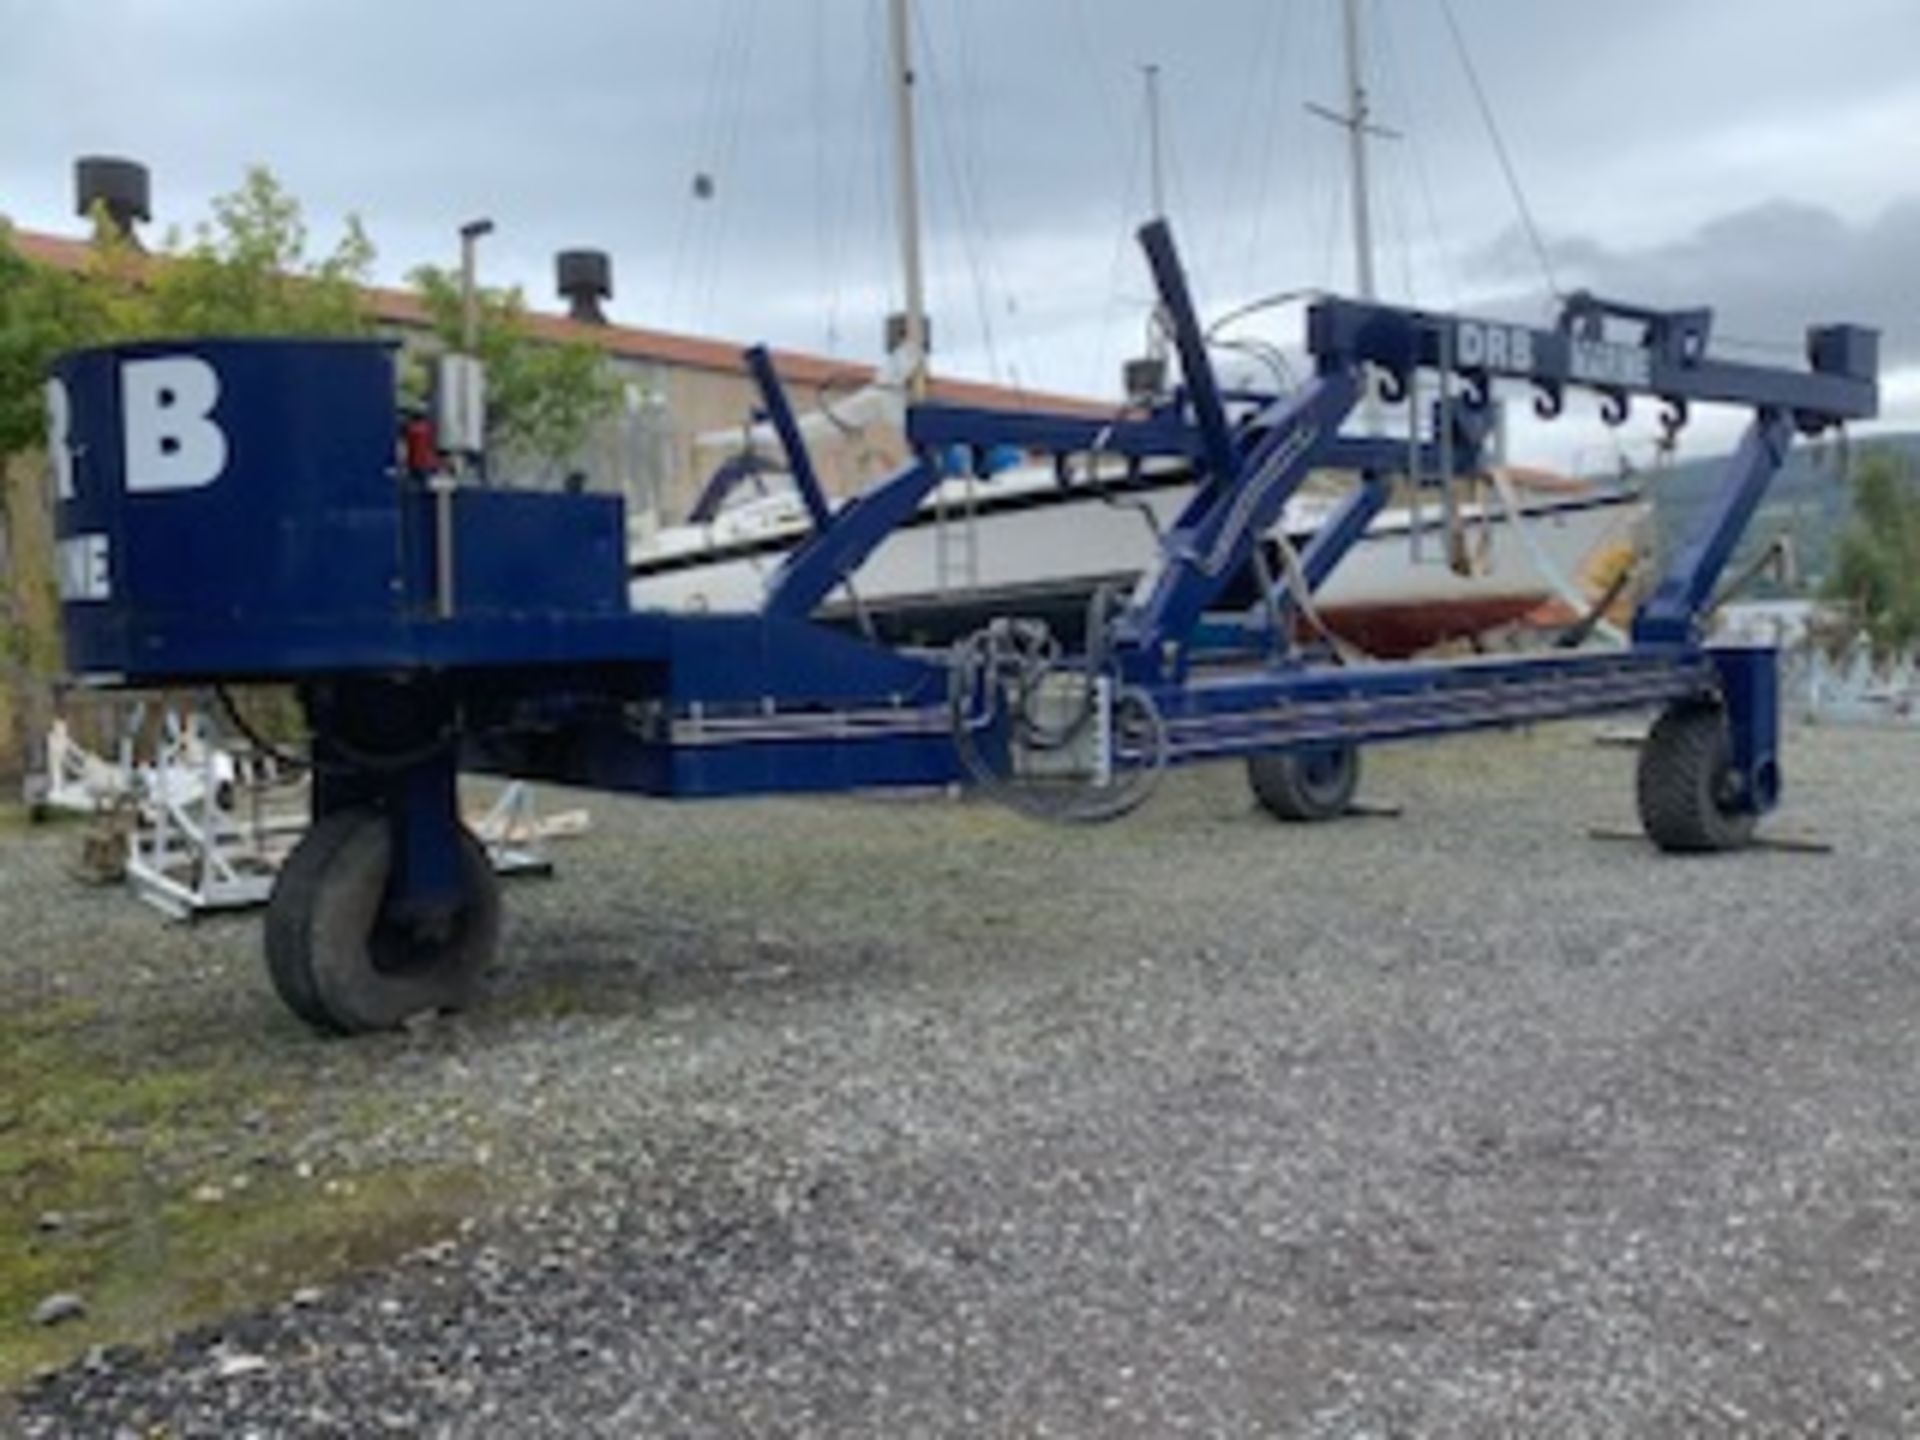 18T SELF PROPELLED WISE AMPHIBIOUS MARINE HOIST C/W VARIABLE WIDTH FRAME **RECENTLY REFURBED - NEW P - Image 11 of 19